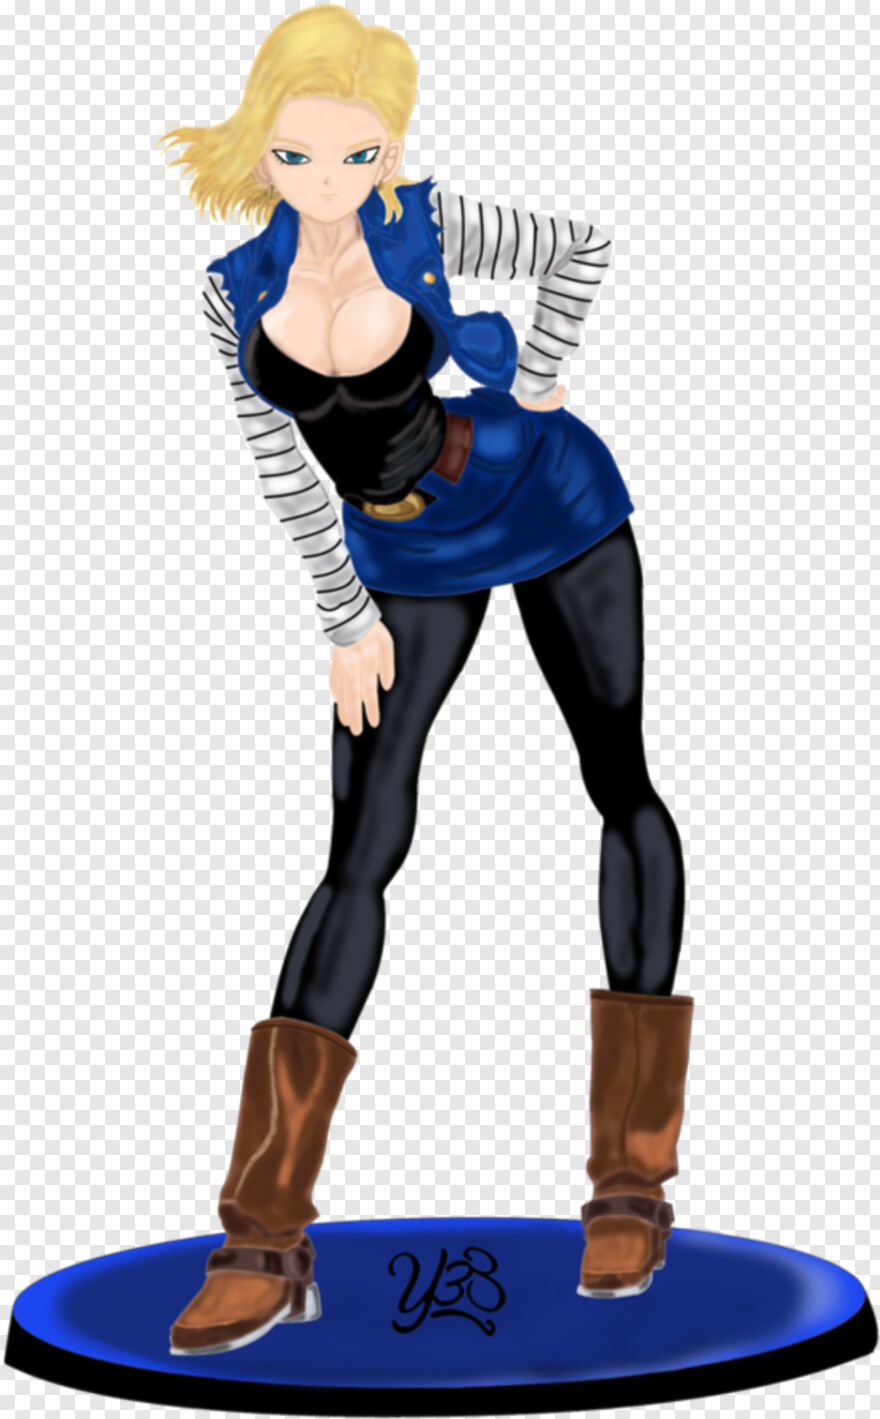 android-18 # 518703